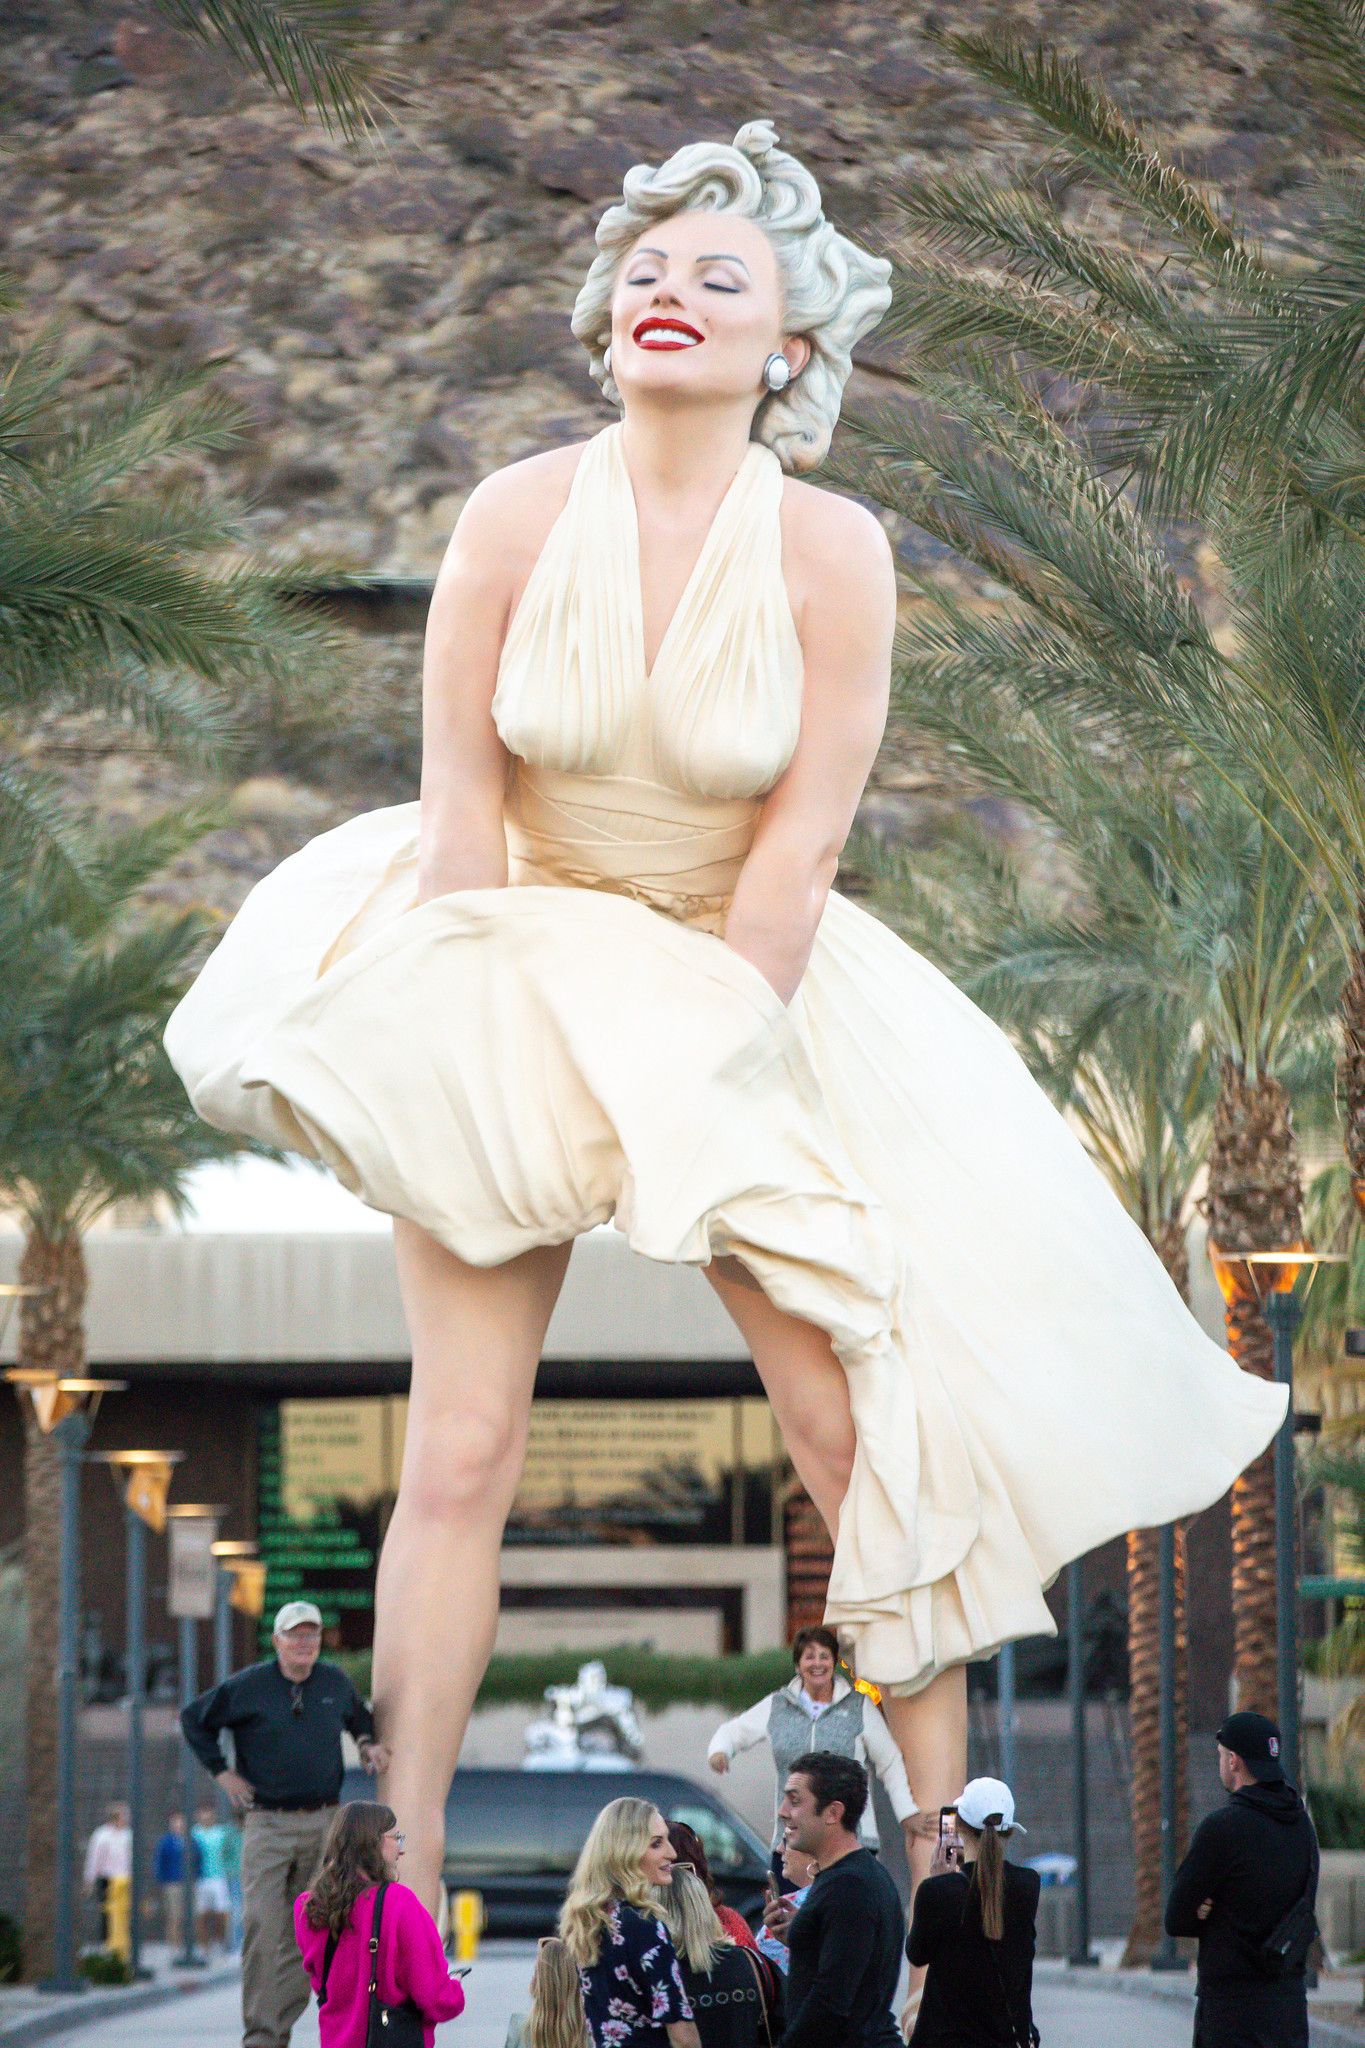 The Marilyn Monroe Giant Sculpture At Palm Springs.